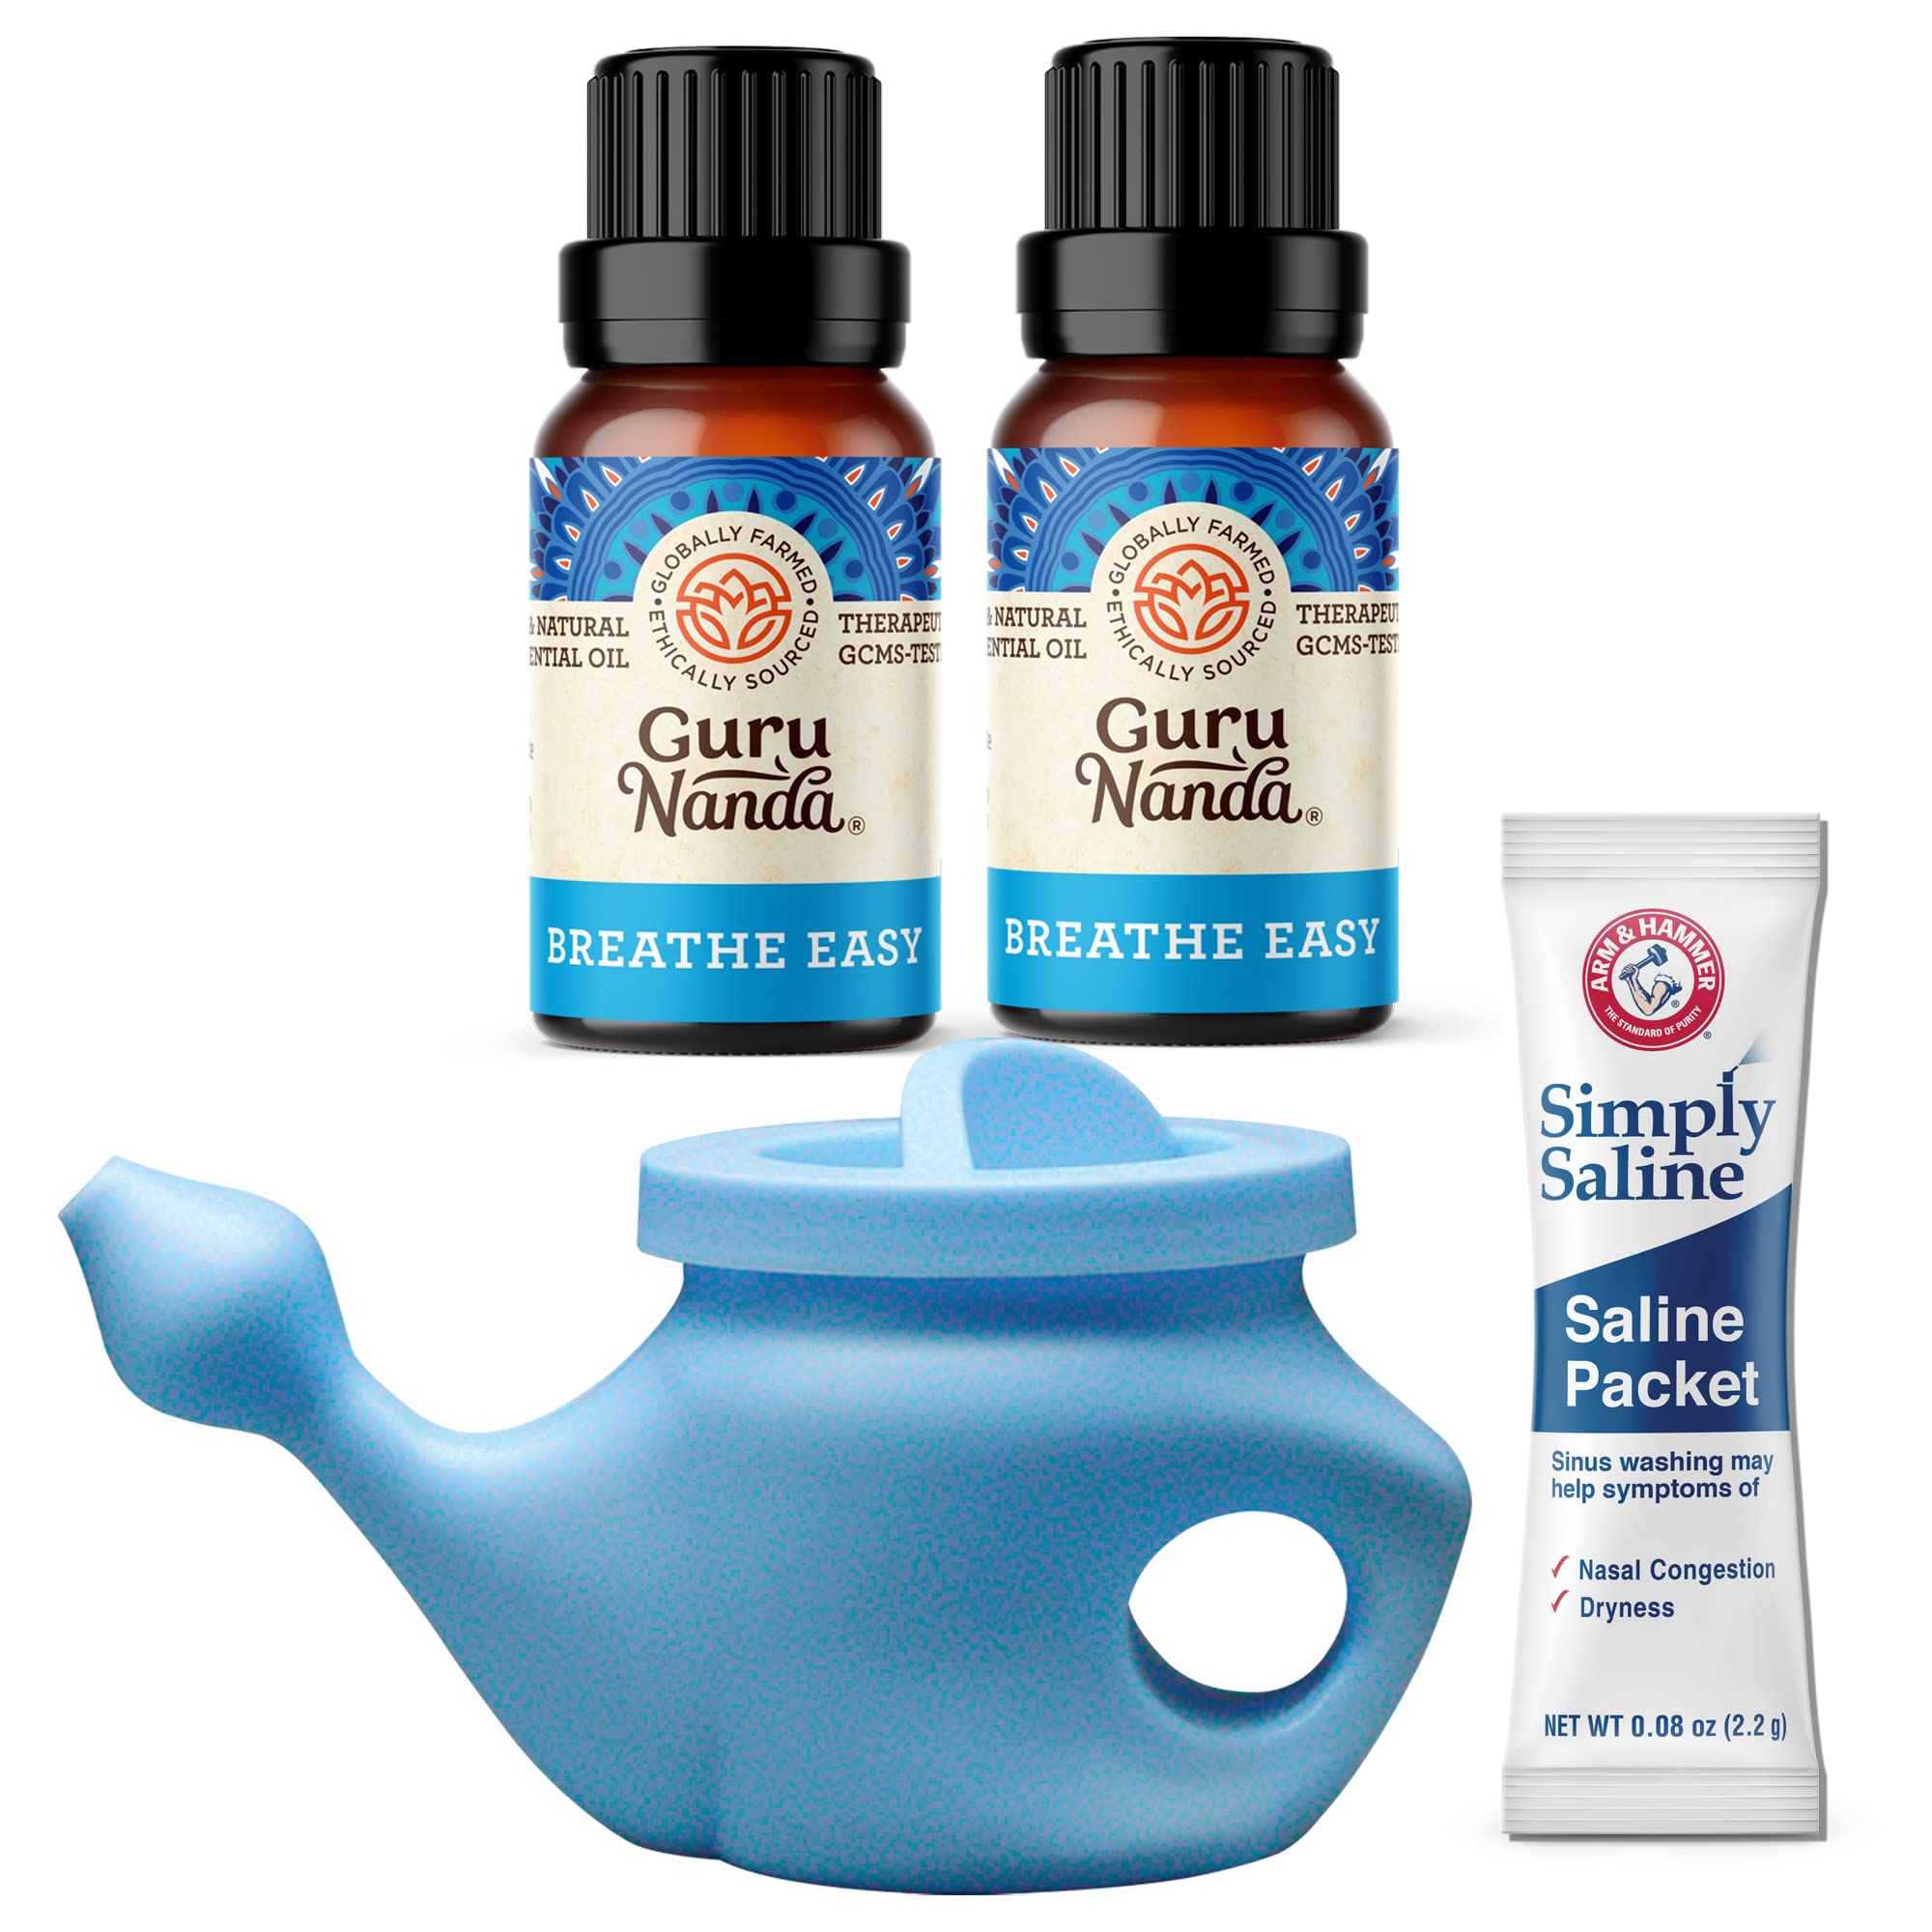 GuruNanda Neti Pot with Saline Packet (240 ml) & Breathe Easy Essential Oil (Pack of 2 x 15 ml) - Helps Relieve Nasal Congestion & Irritation with 100% Pure Peppermint & Eucalyptus Essential Oils